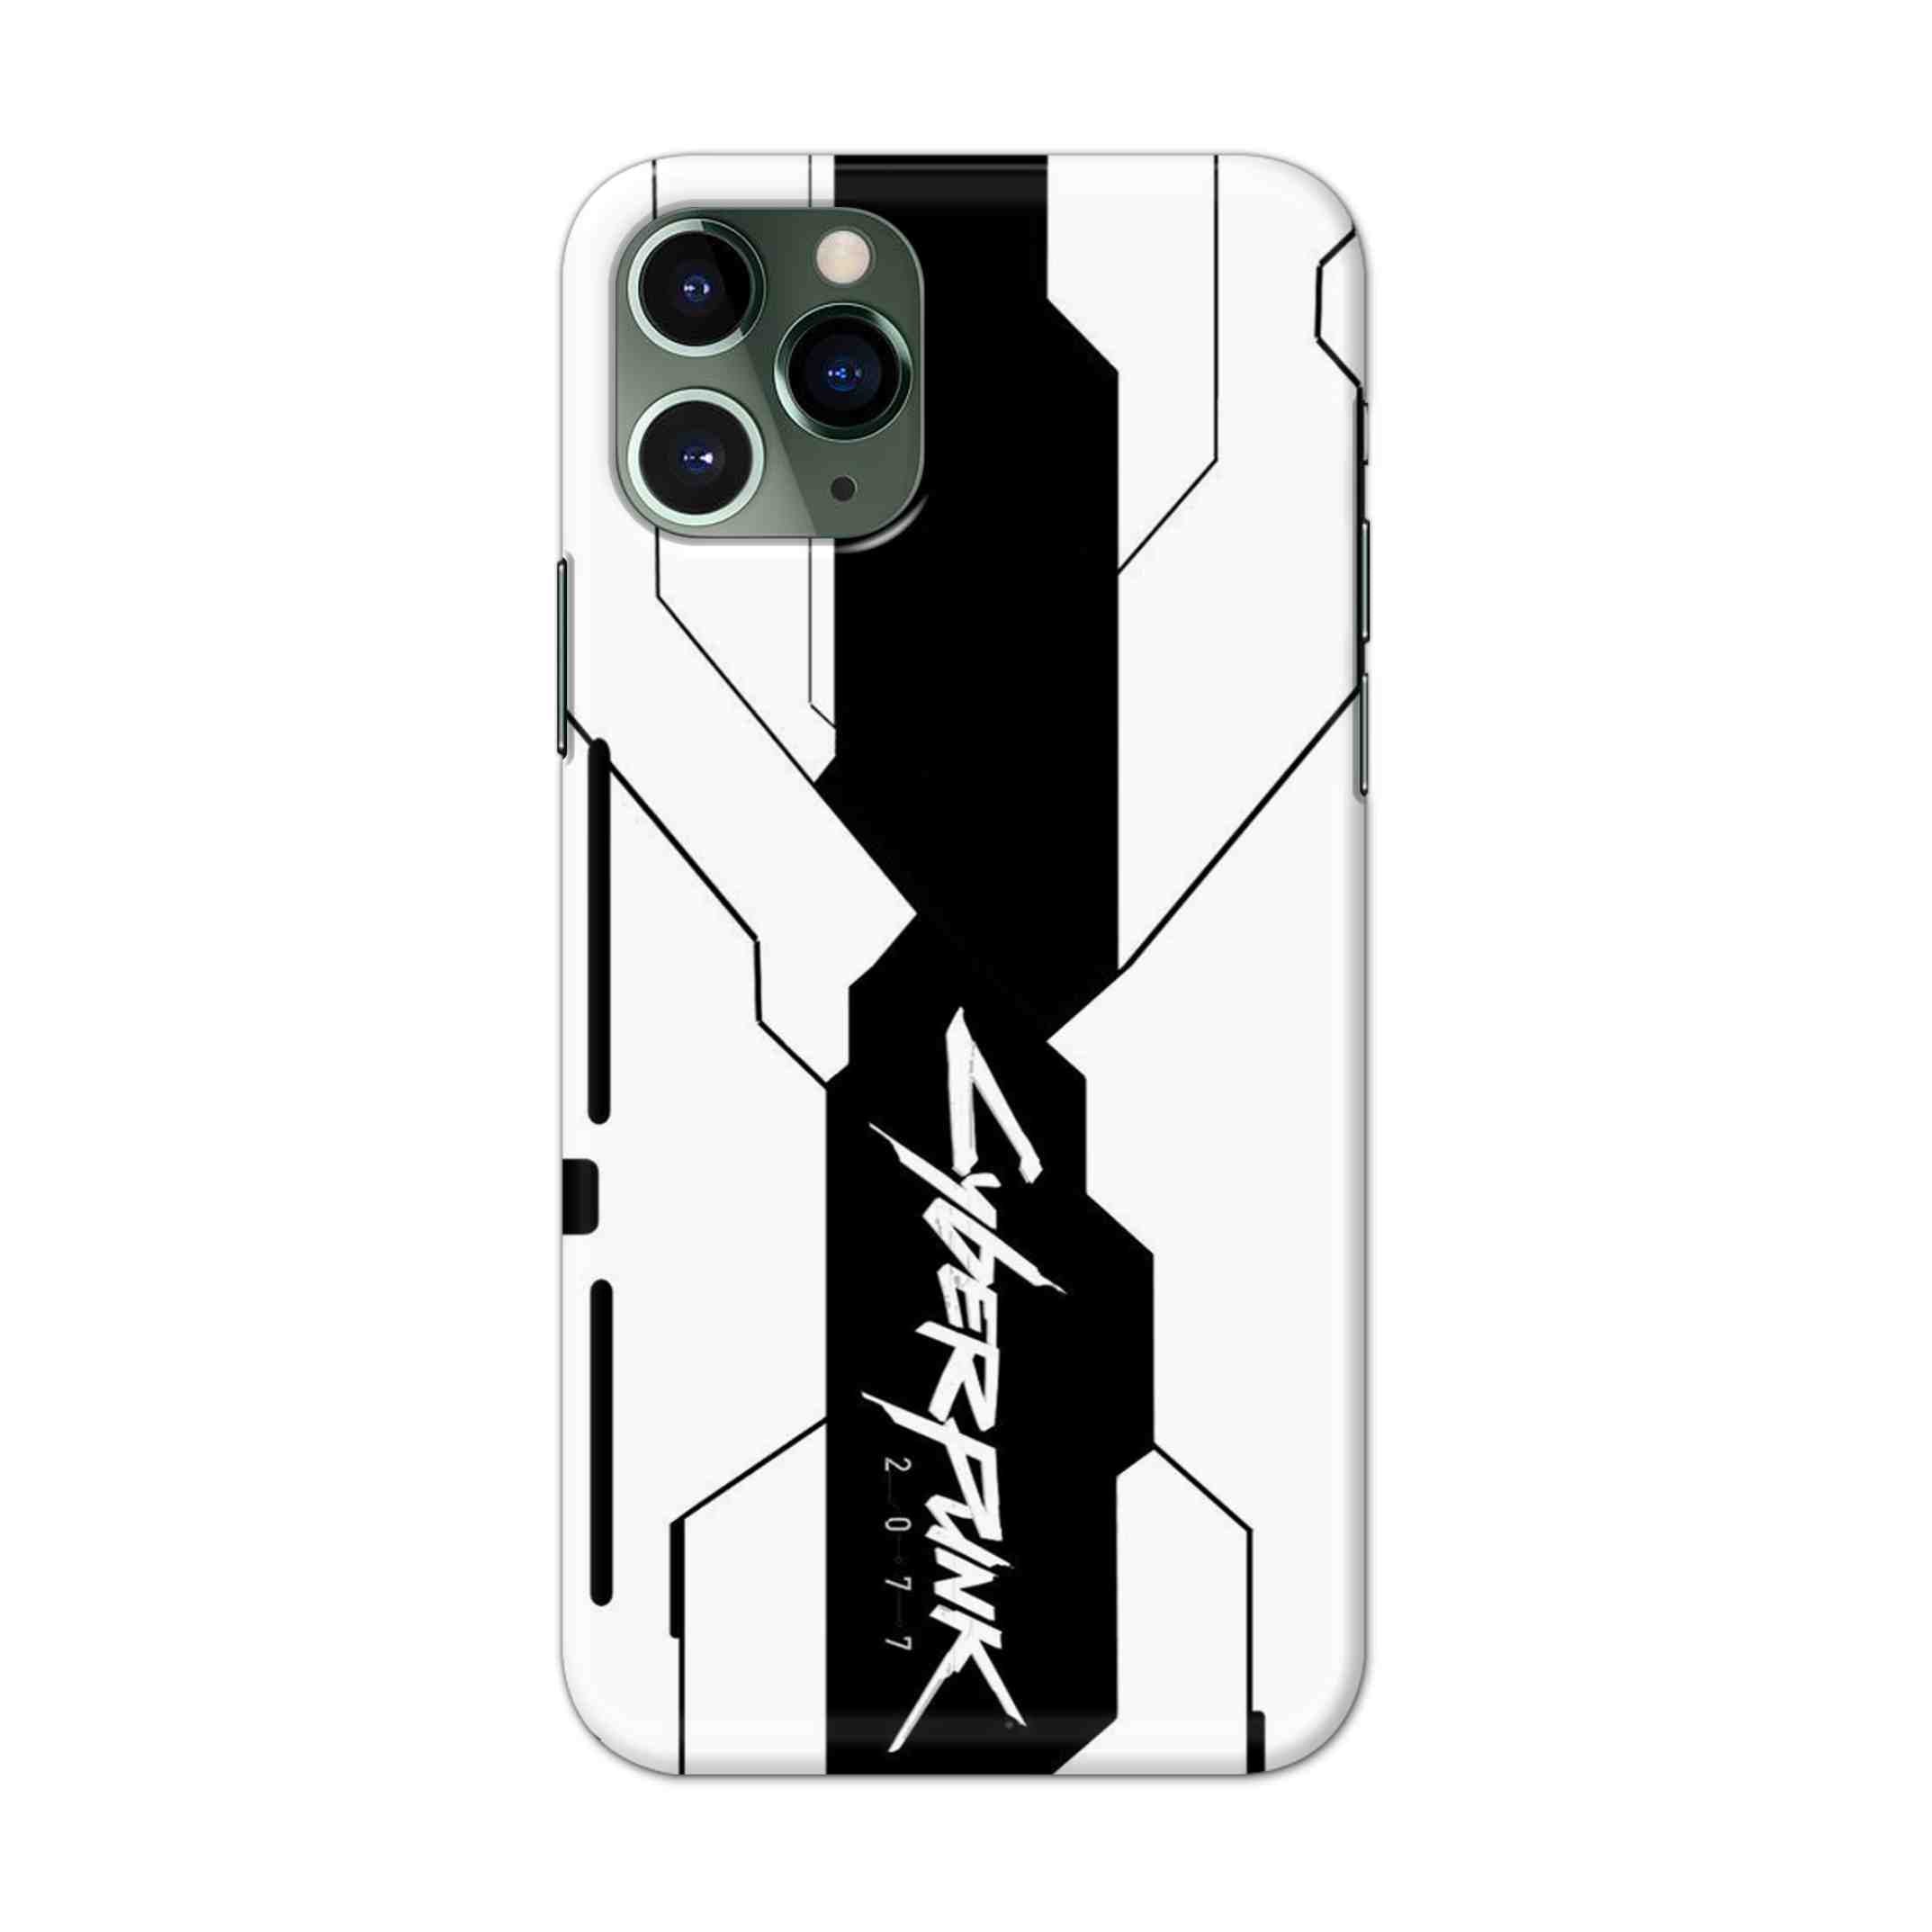 Buy Cyberpunk 2077 Hard Back Mobile Phone Case/Cover For iPhone 11 Pro Online